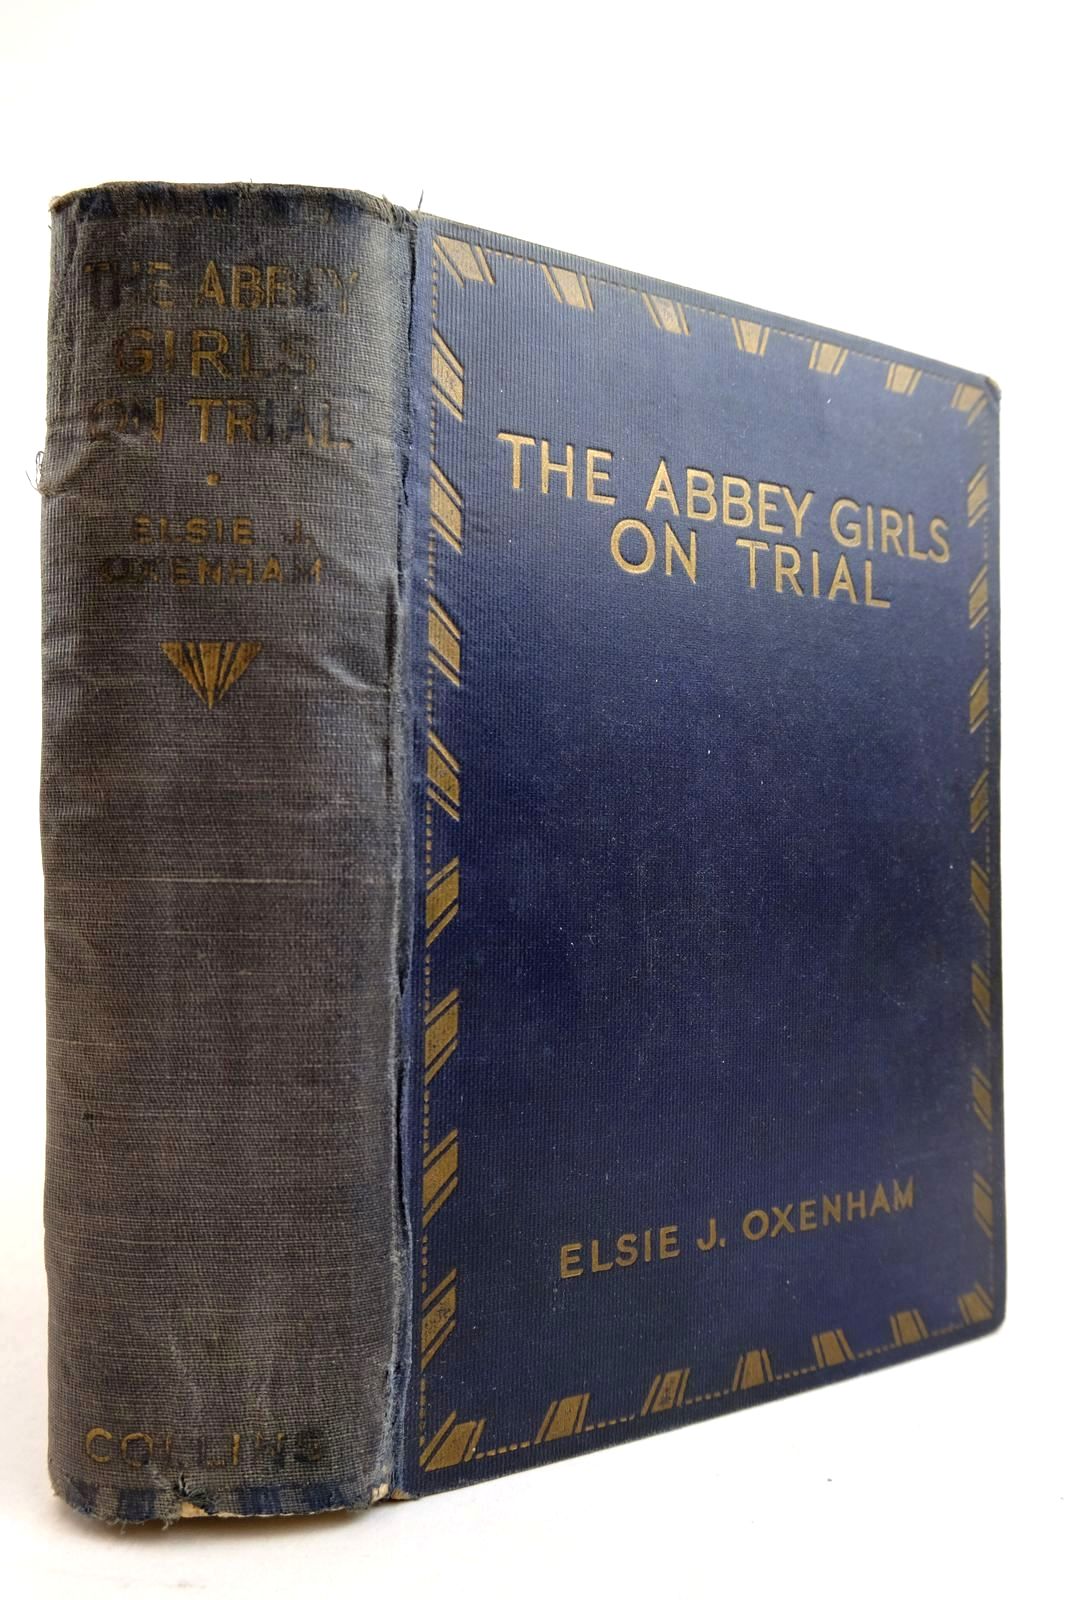 Photo of THE ABBEY GIRLS ON TRIAL written by Oxenham, Elsie J. published by Collins Clear-Type Press (STOCK CODE: 2134318)  for sale by Stella & Rose's Books